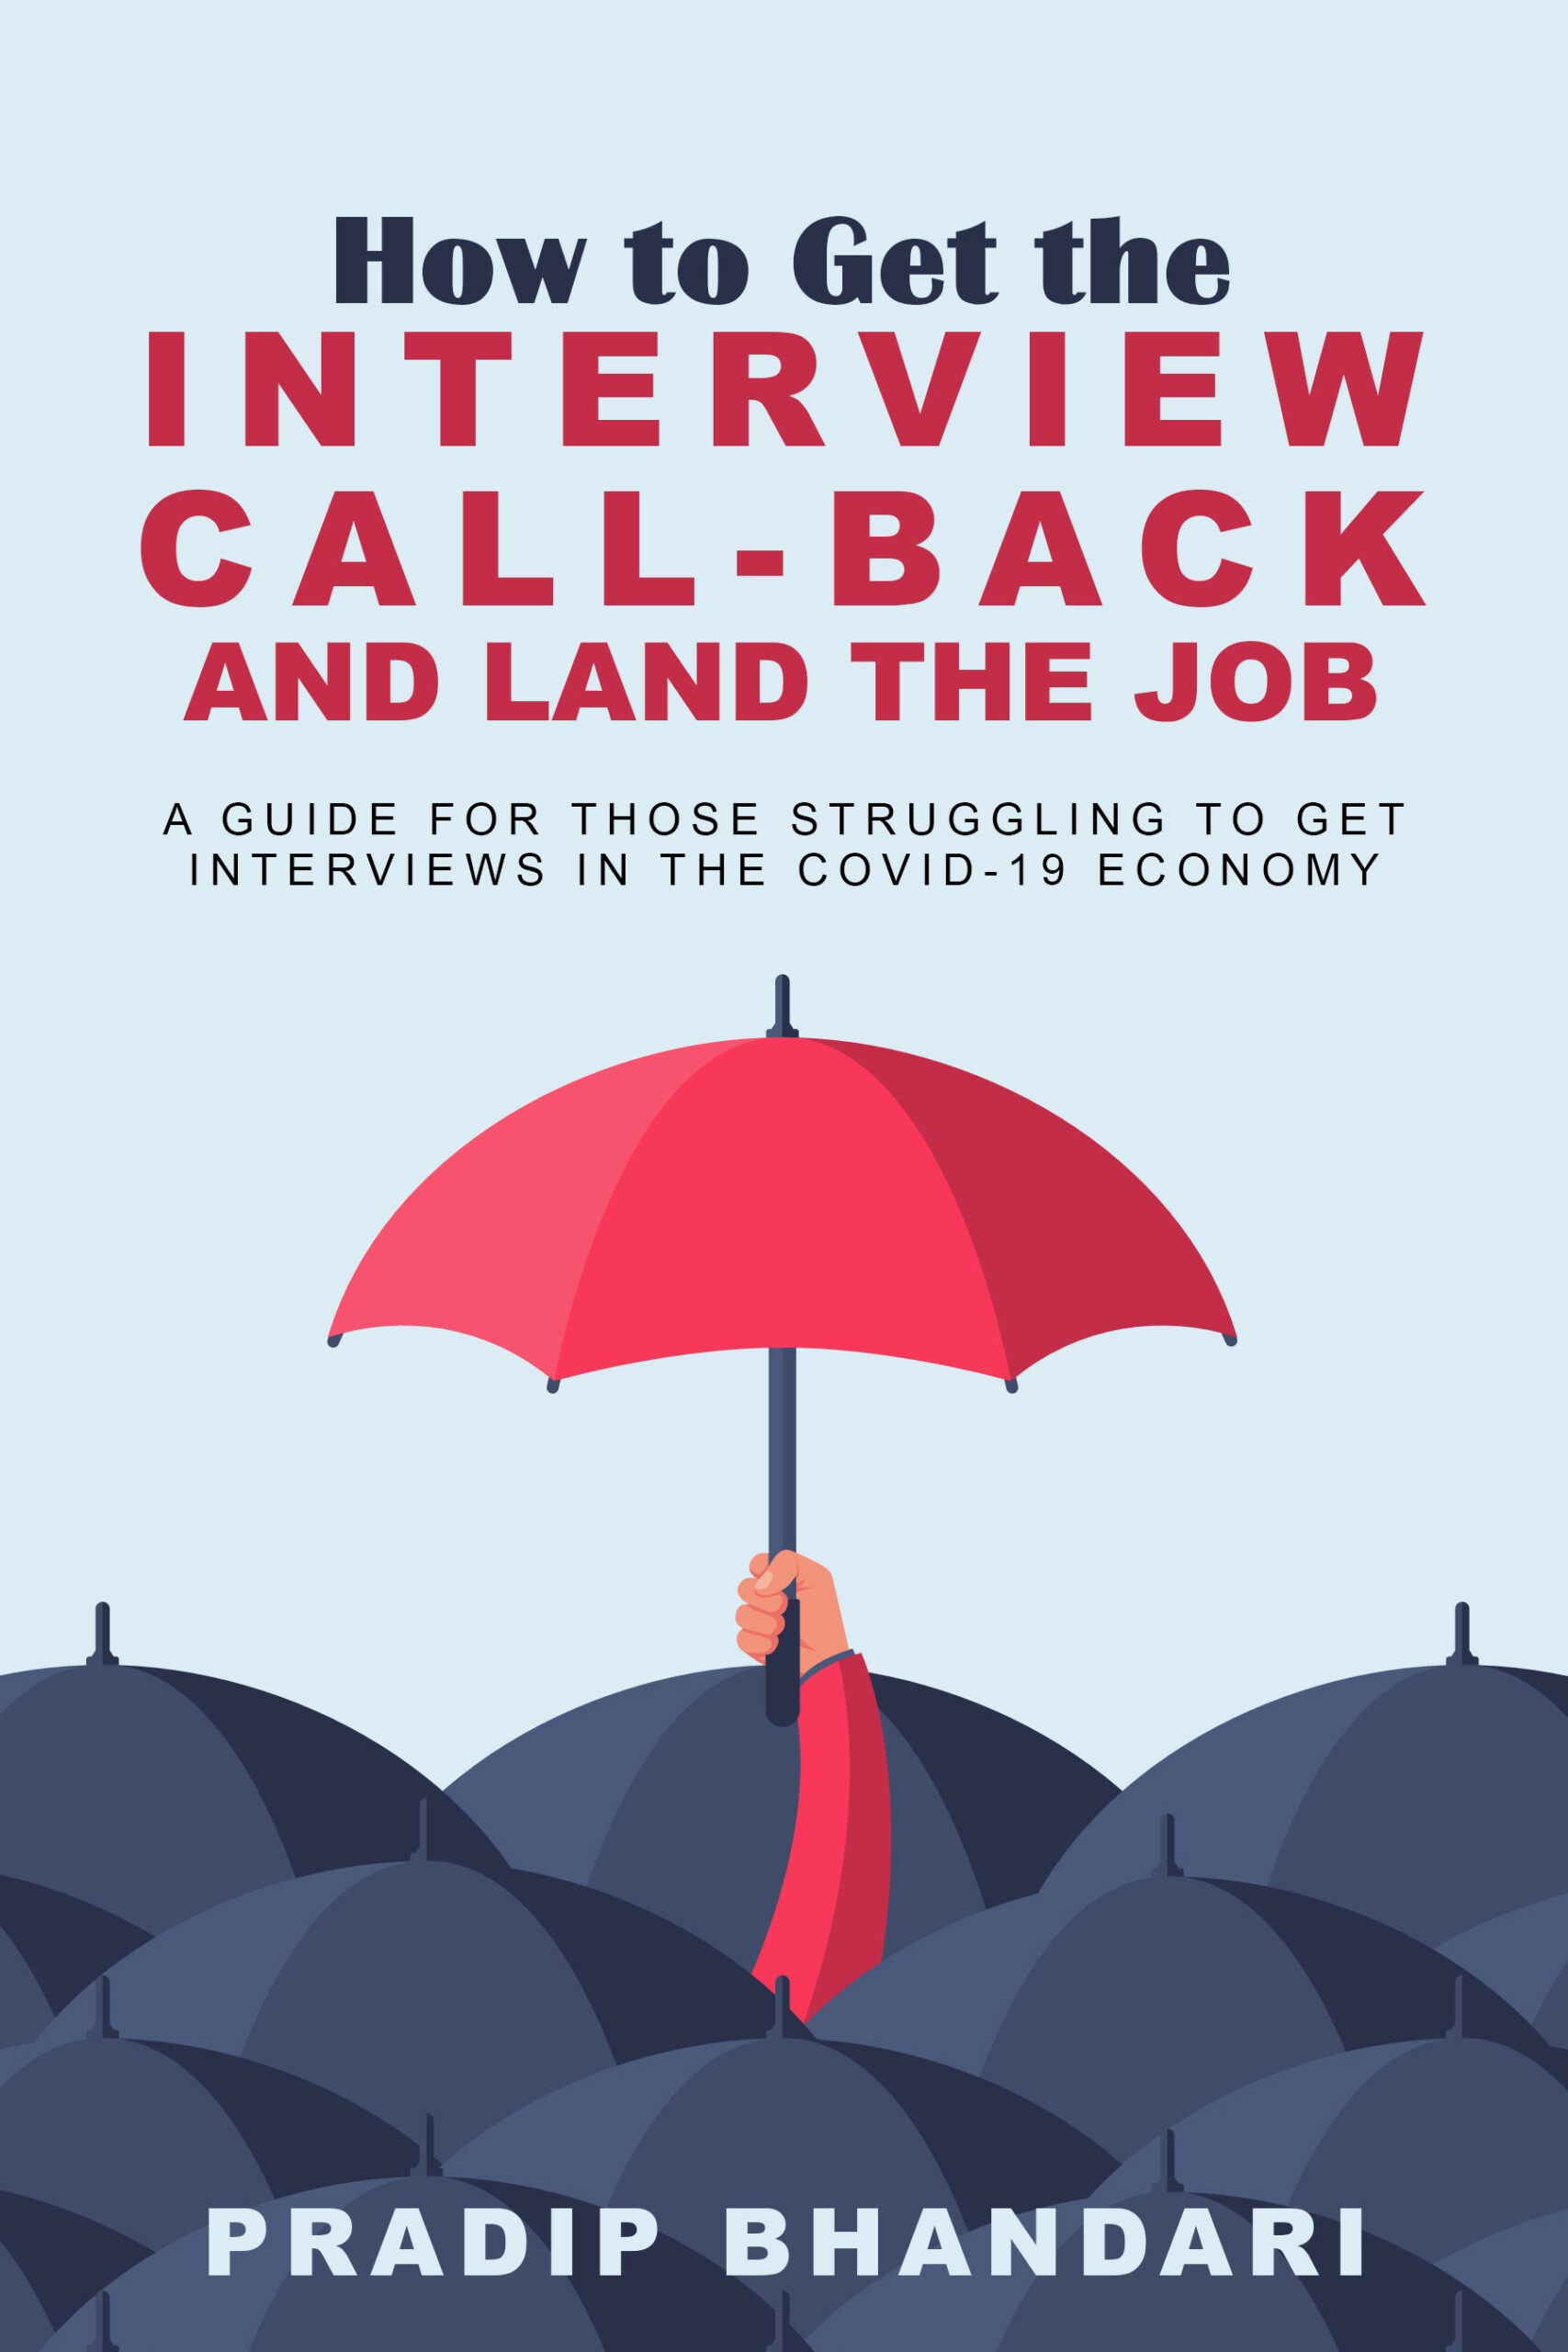 FREE: How to Get the Interview CallBack and Land the Job: A guide for those struggling to get interviews in the COVID-19 economy by PRADIP BHANDARI